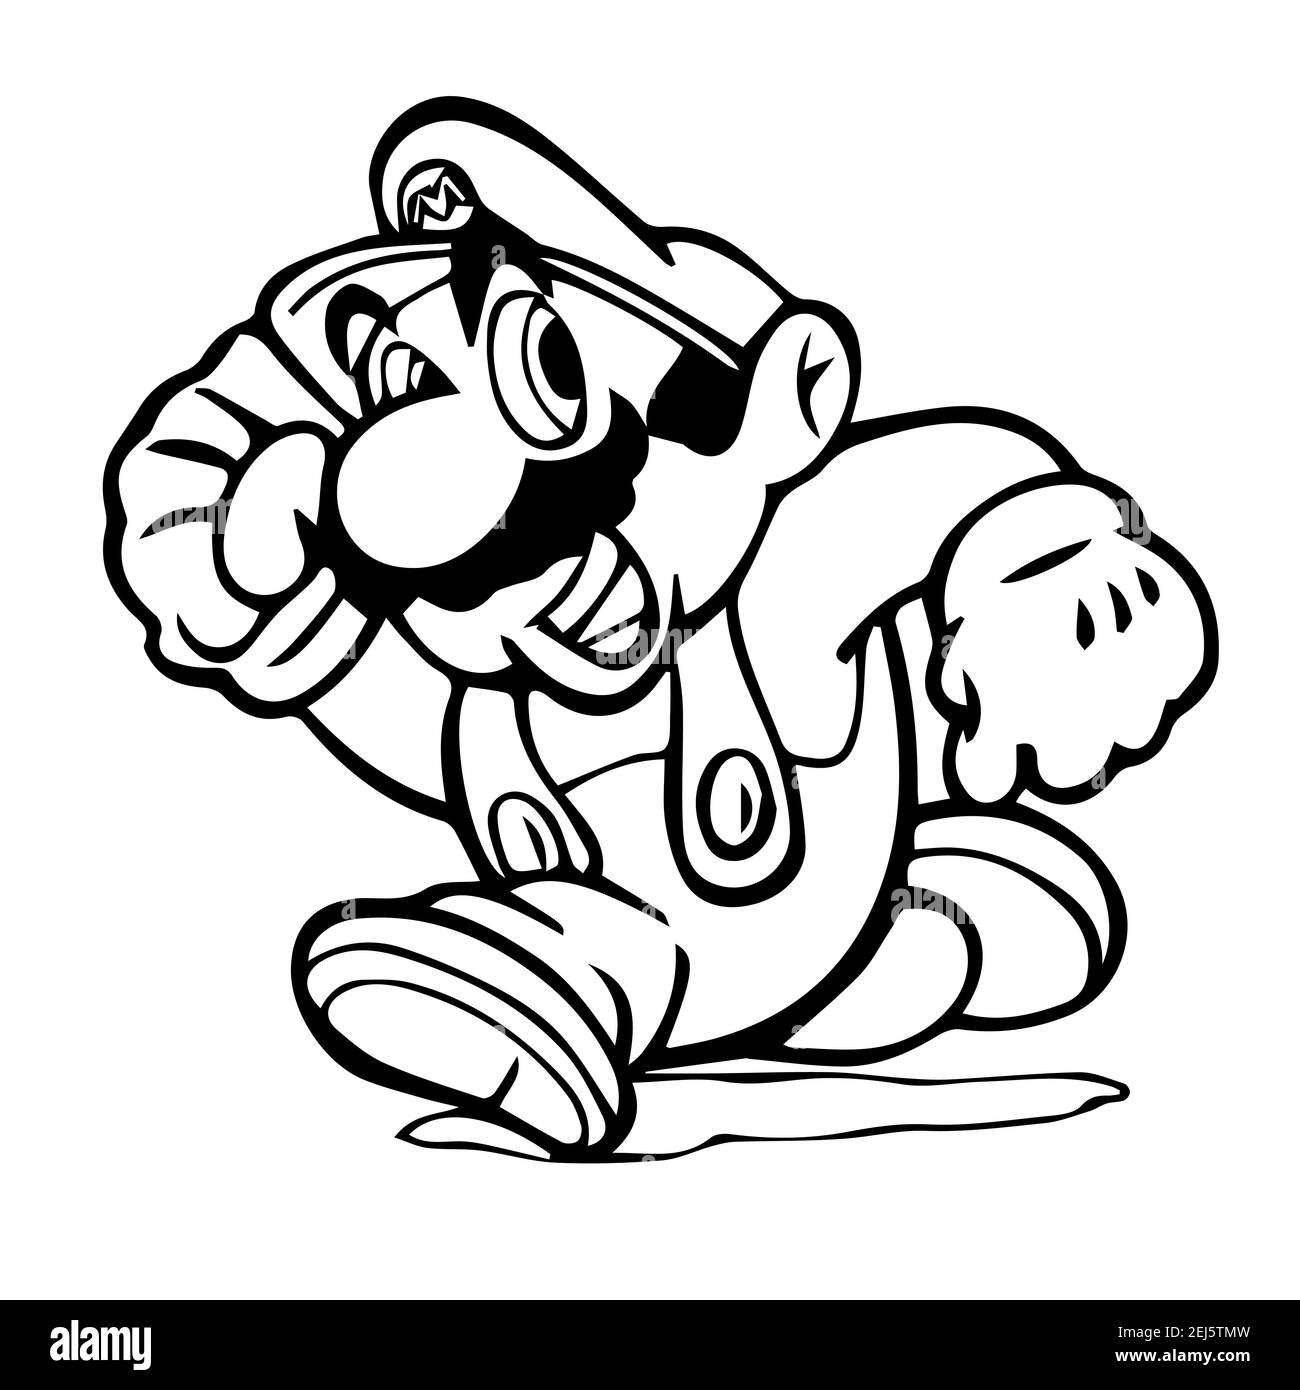 Mario pixel art printed on poster, Mario is a fictional character in the Mario video game franchise, created by Nintendo Stock Vector